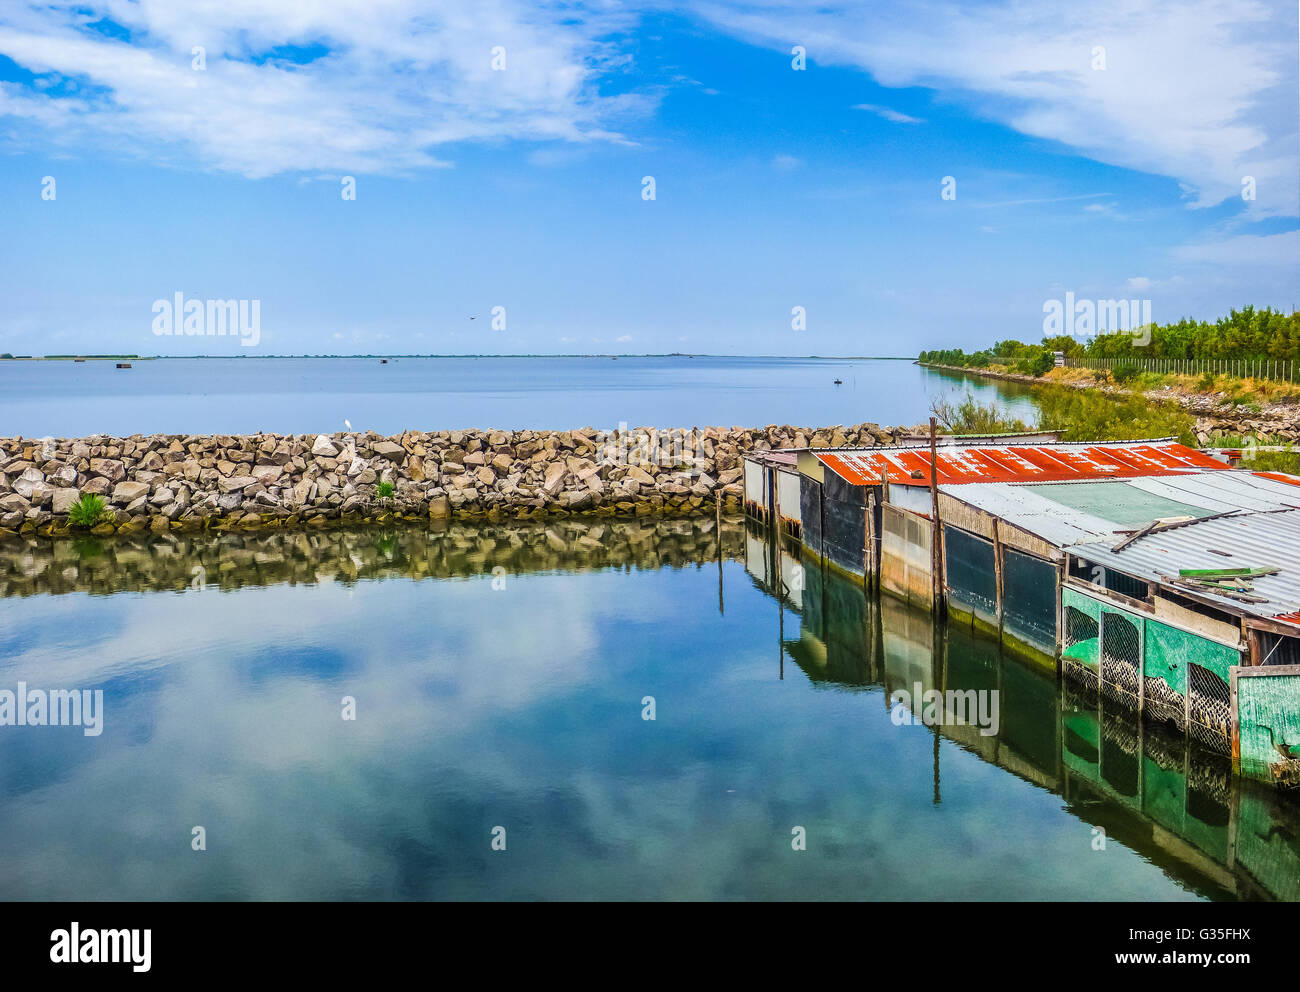 Beautiful view of tranquil seascape with colorful shanties in the Delta del Po national park region on a sunny day, Venetian Lagoon, Italy Stock Photo